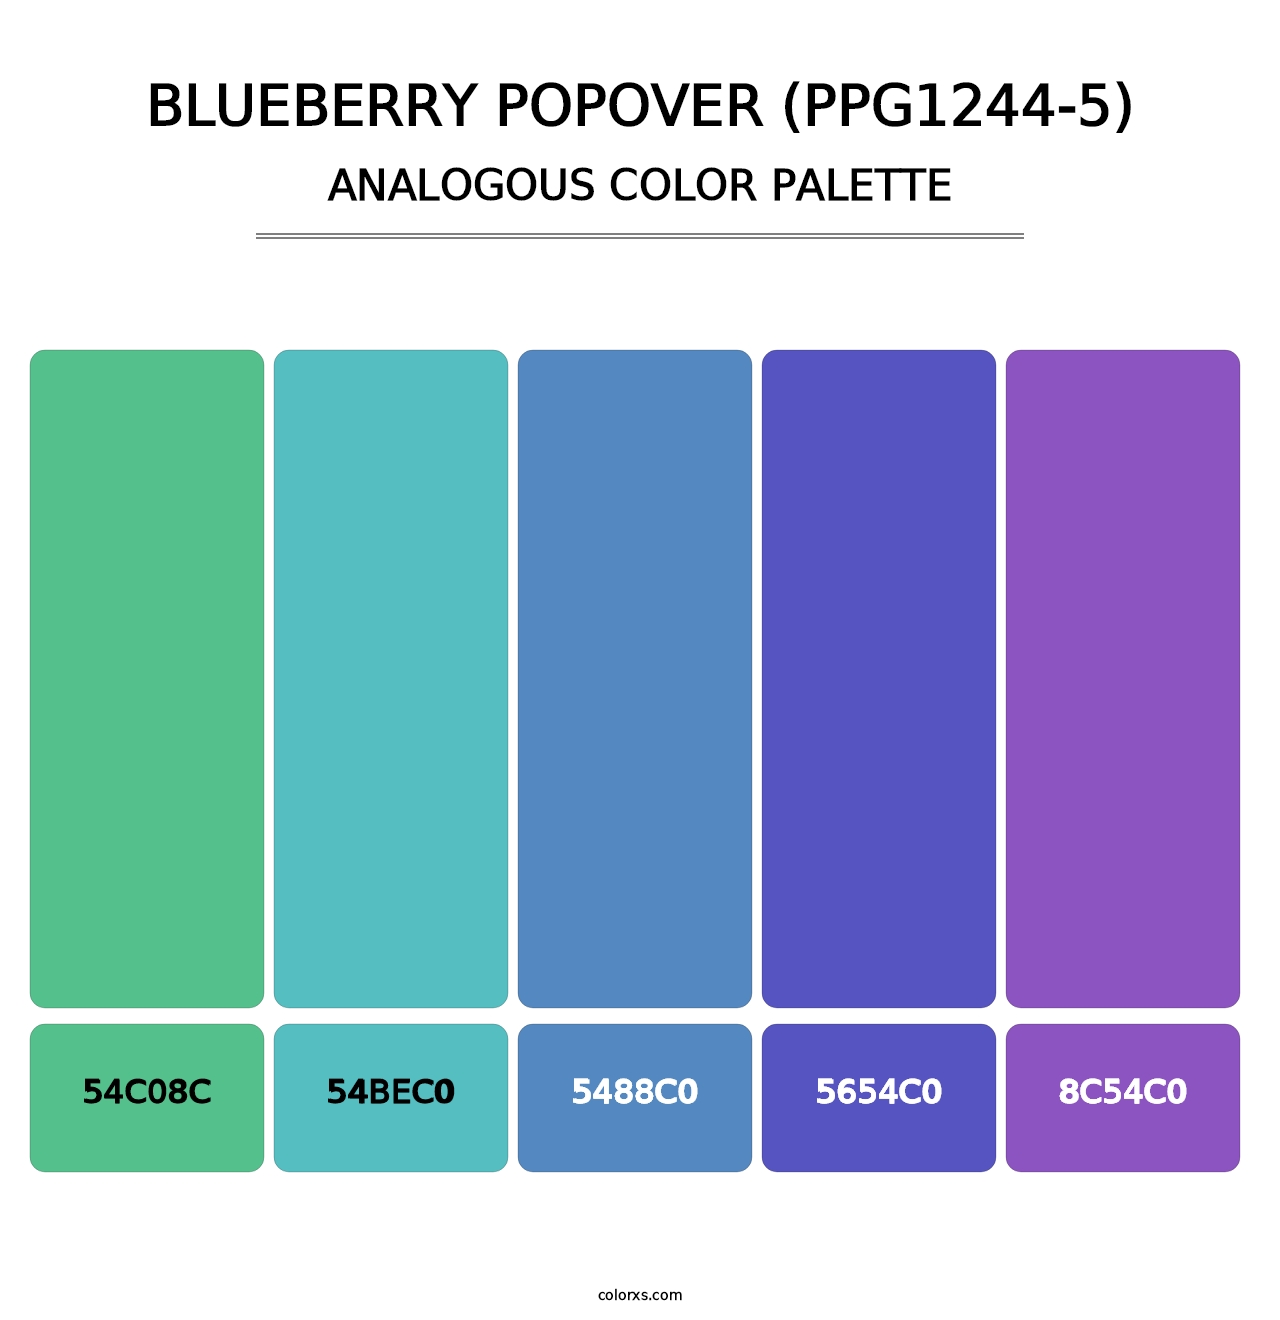 Blueberry Popover (PPG1244-5) - Analogous Color Palette